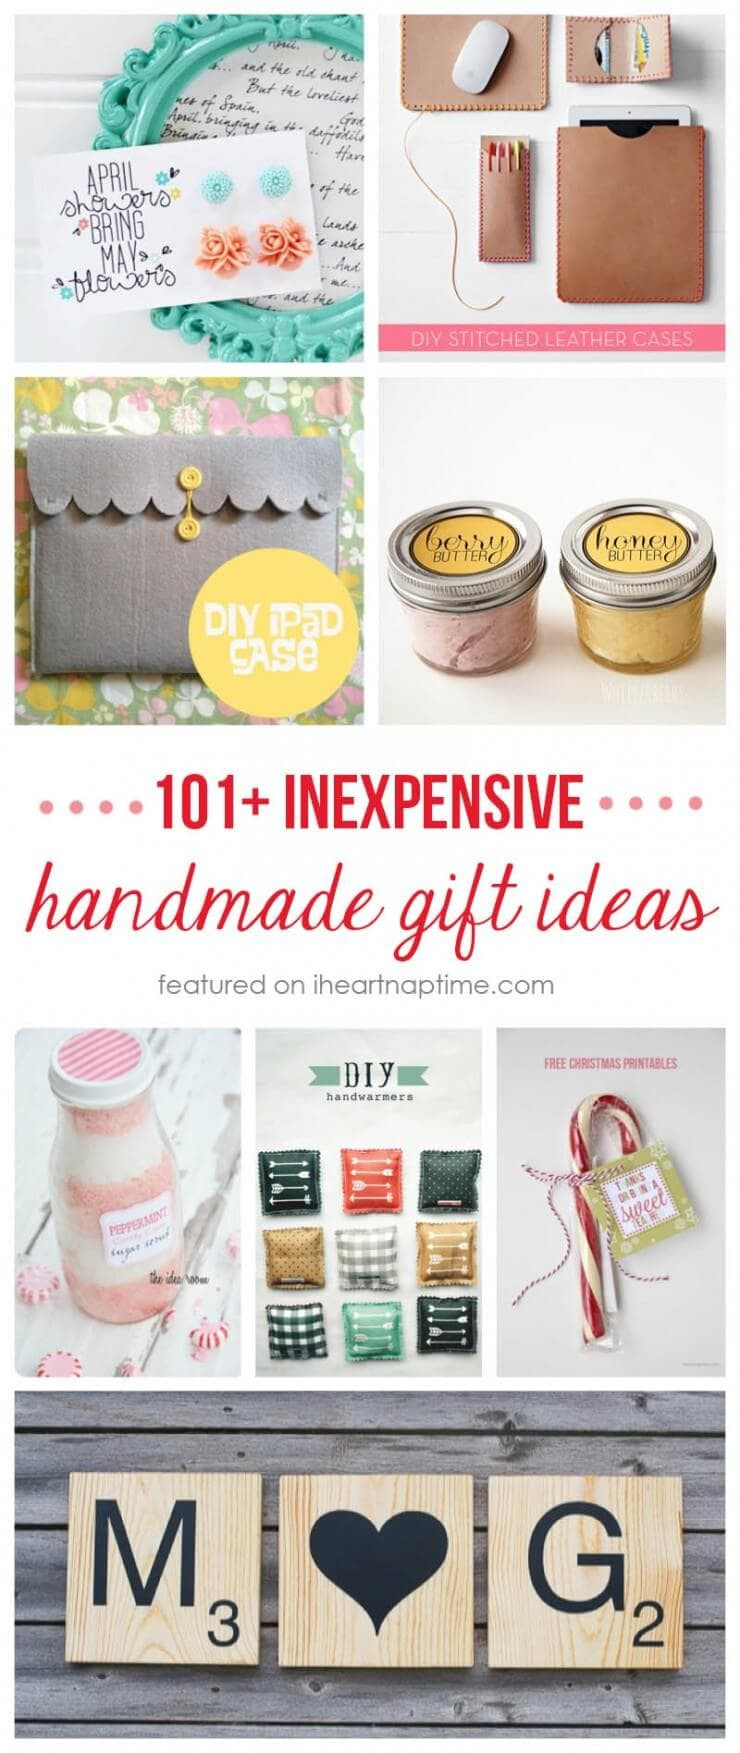 Christmas Presents DIY
 50 homemade t ideas to make for under $5 I Heart Nap Time